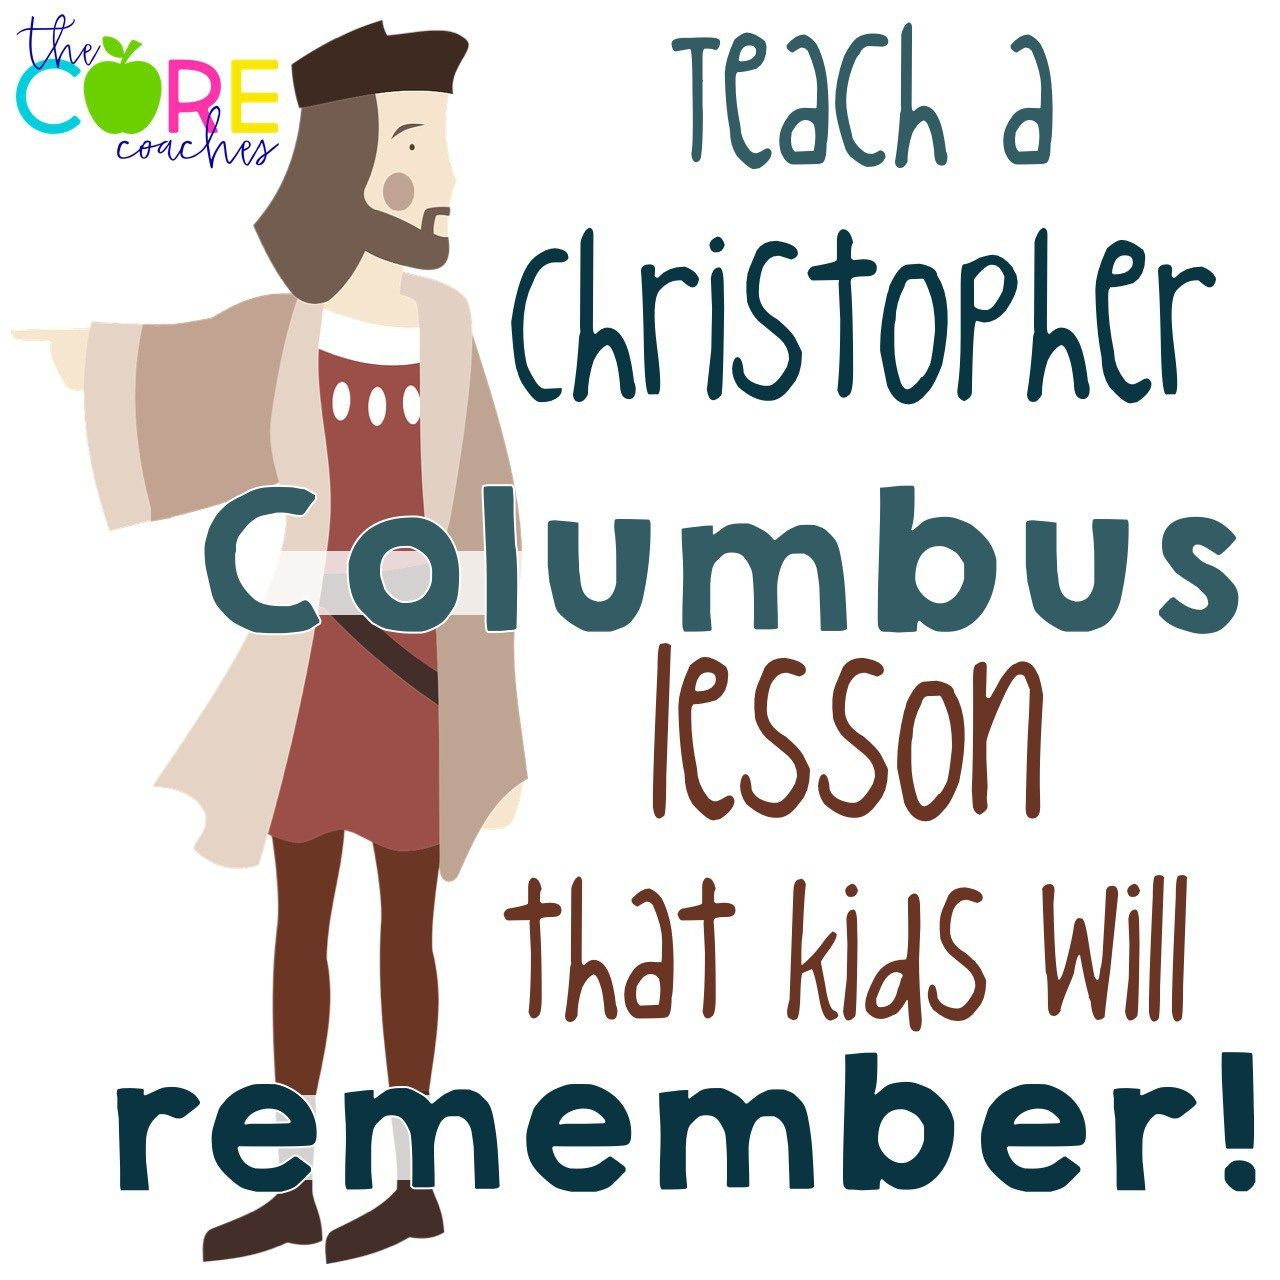 Christopher Columbus: A 1492 Lesson Kids Will Remember